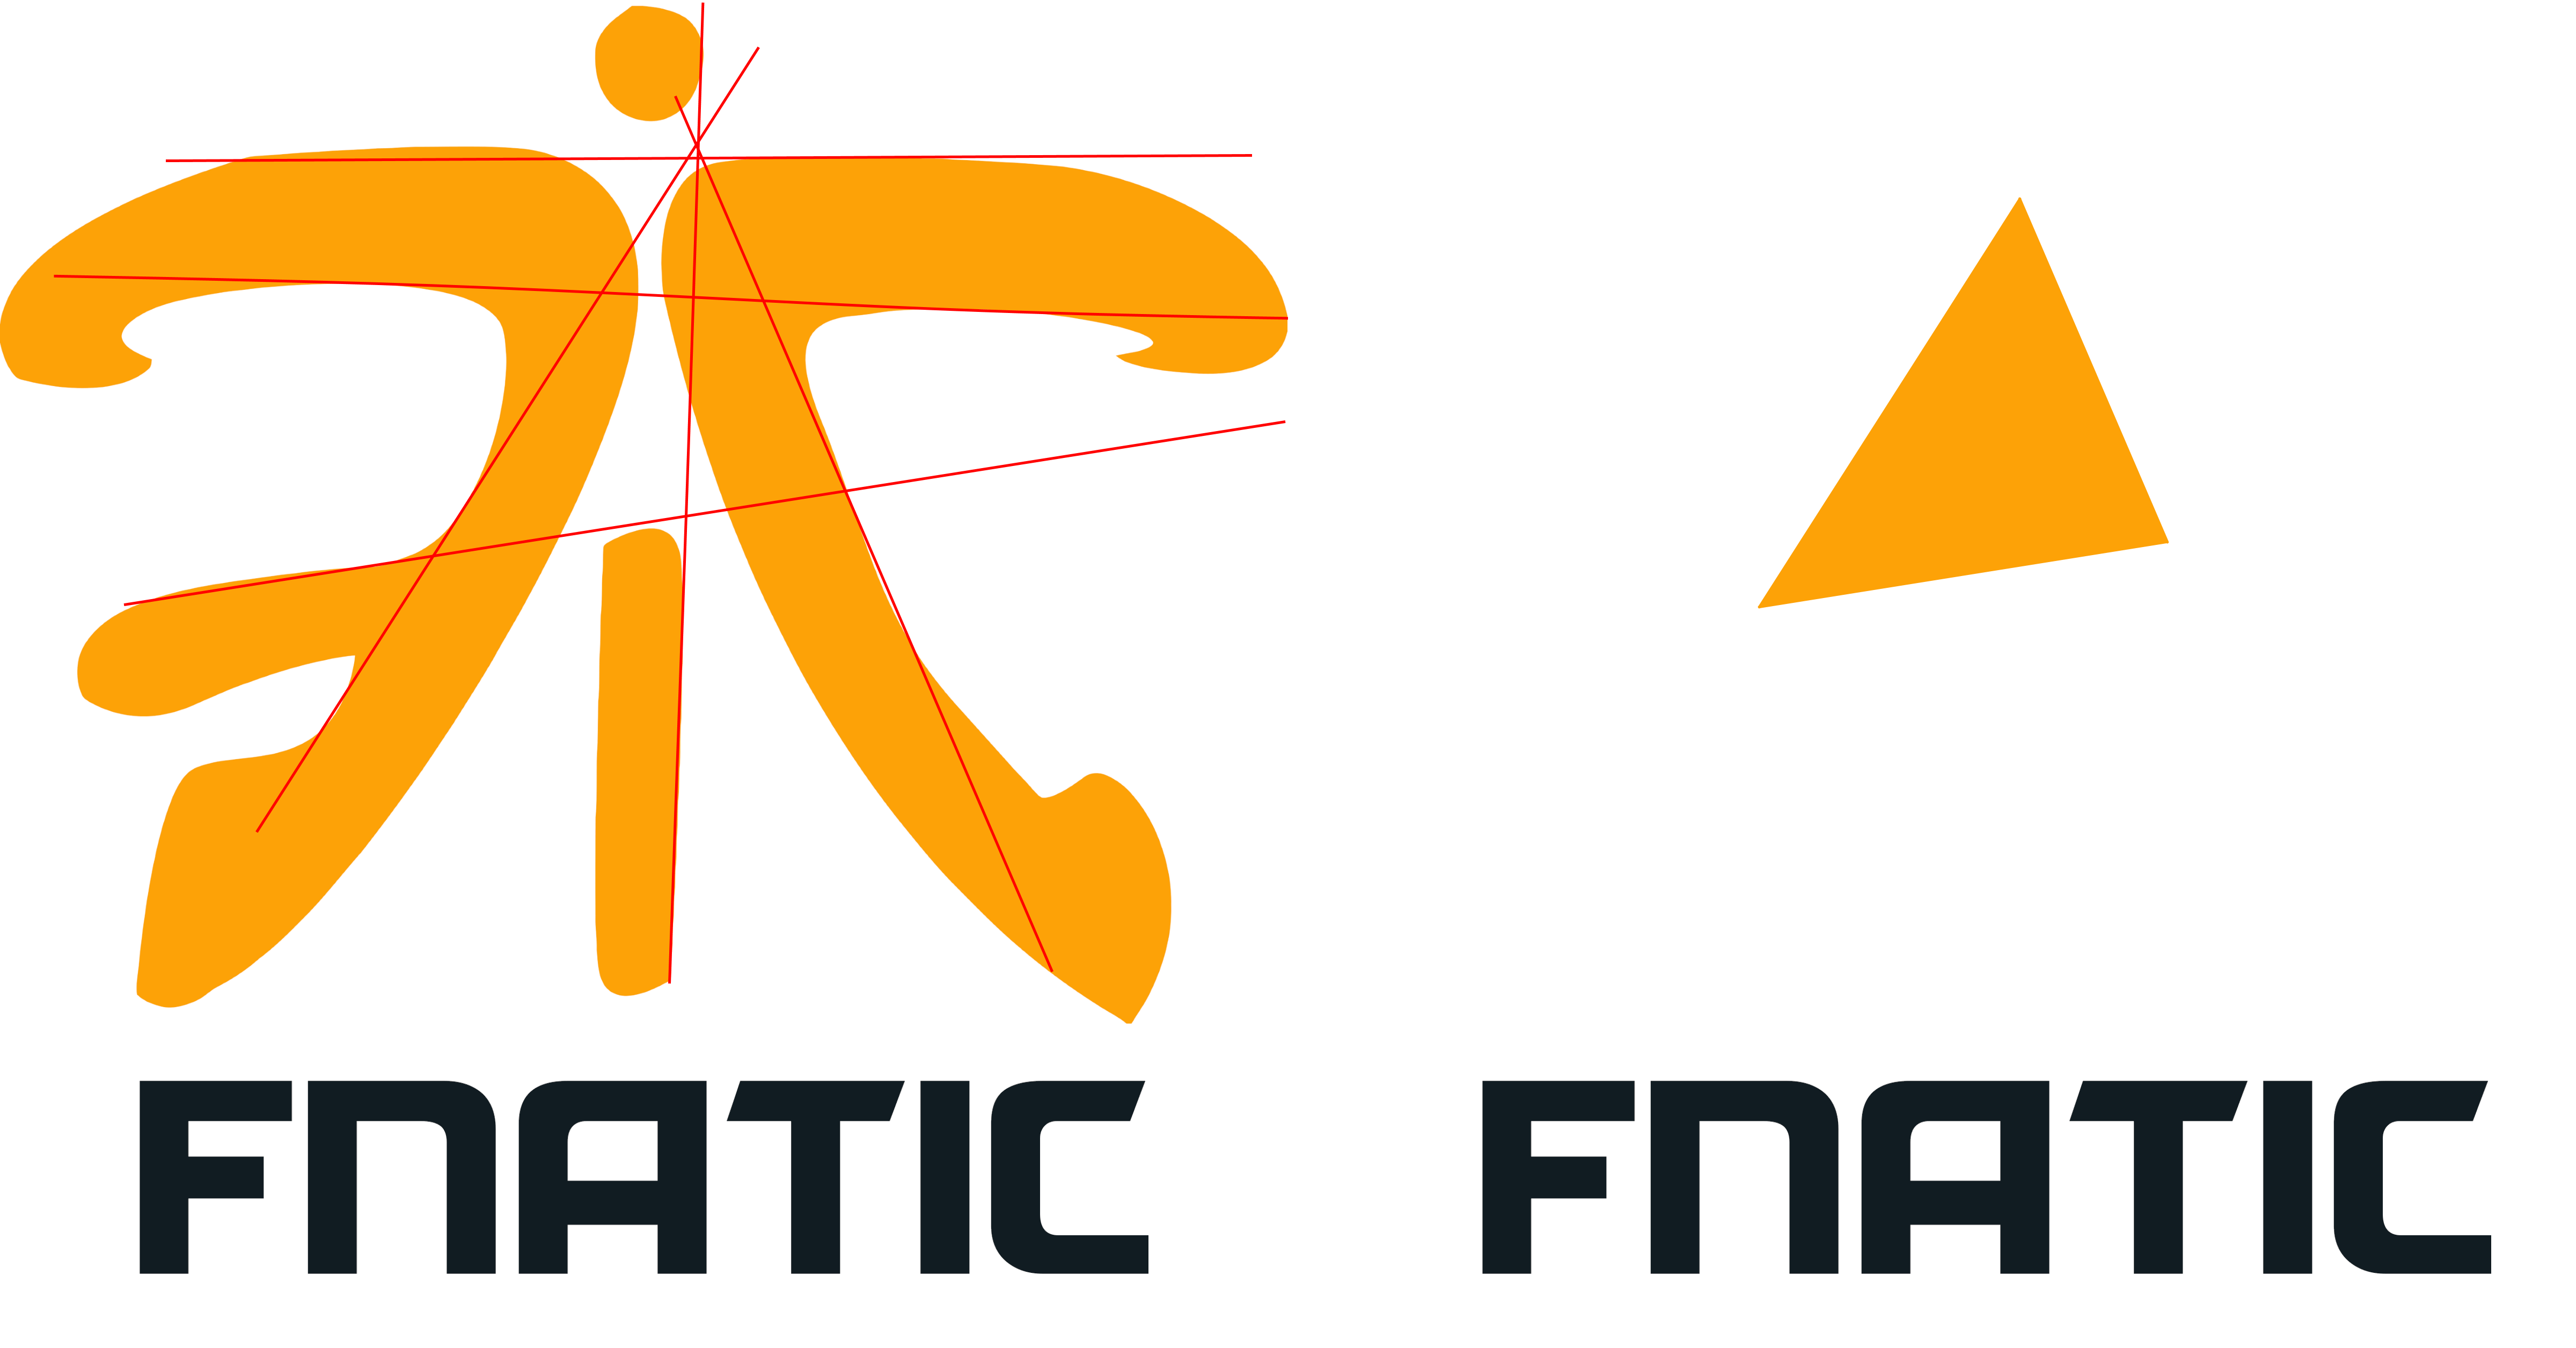 Fnatic Logo - Fnatic should fix their logo. As a designer these angles really